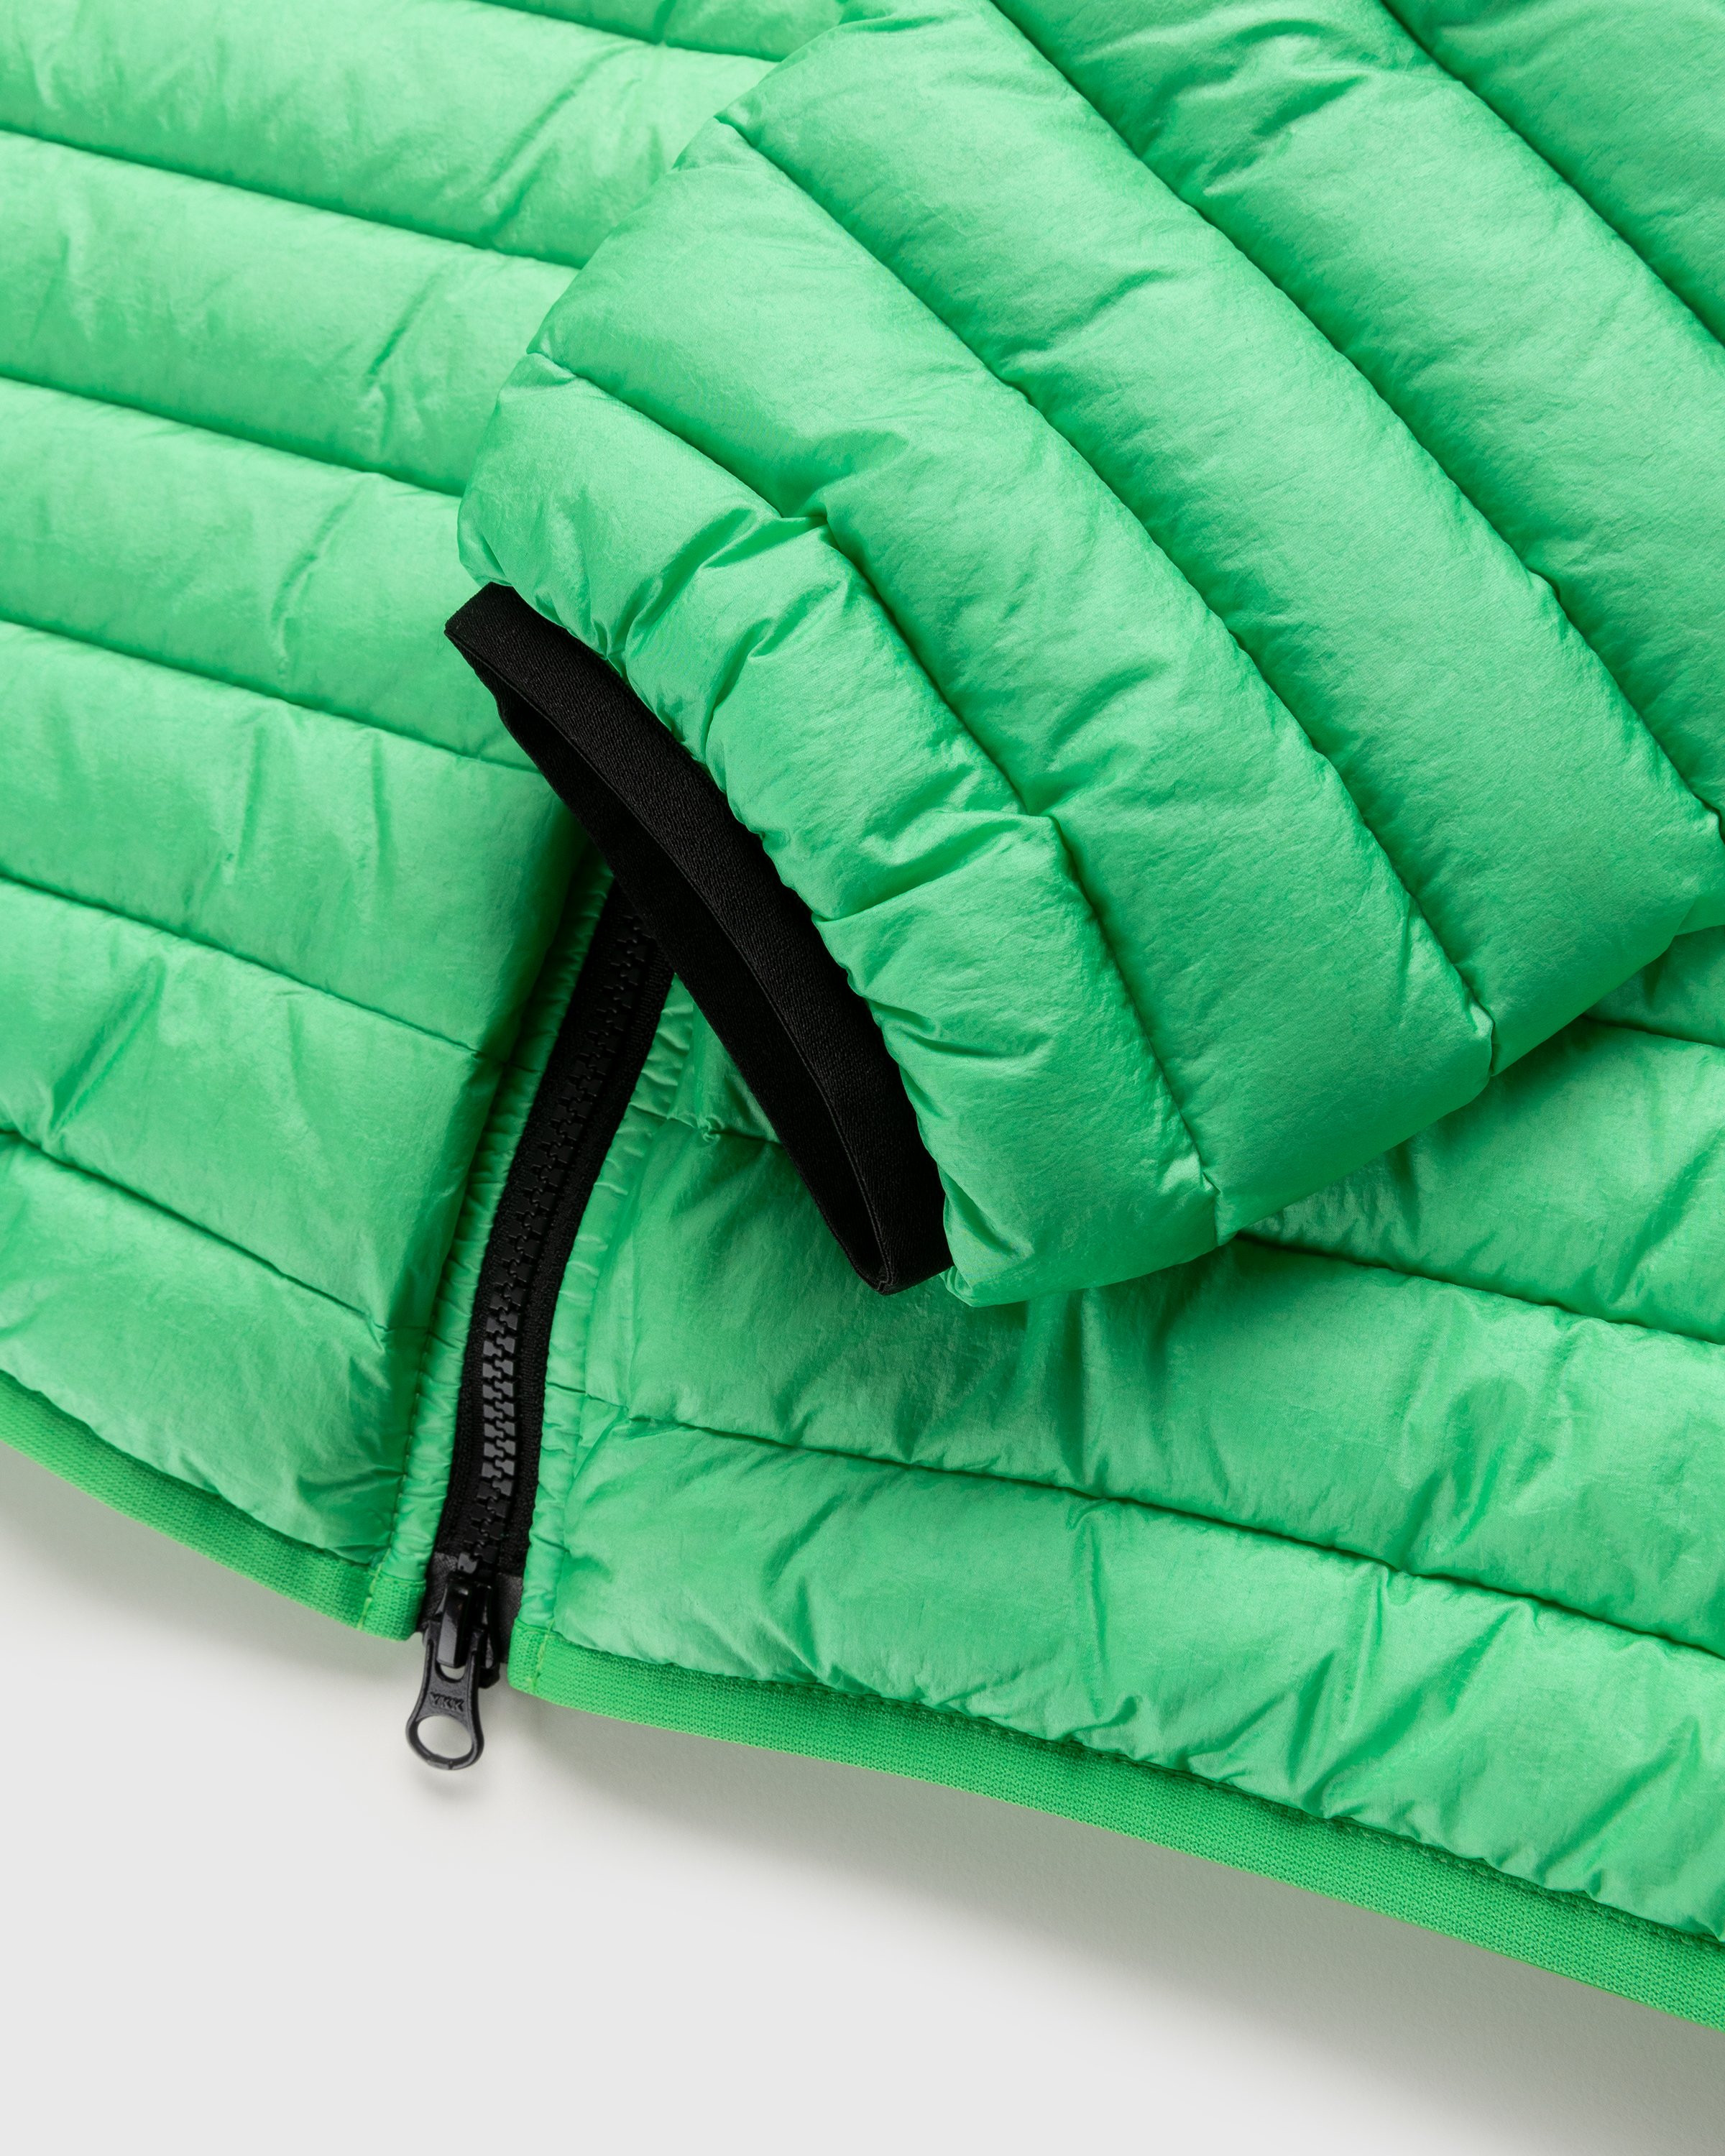 Stone Island - Packable Down Jacket Light Green - Clothing - Green - Image 3